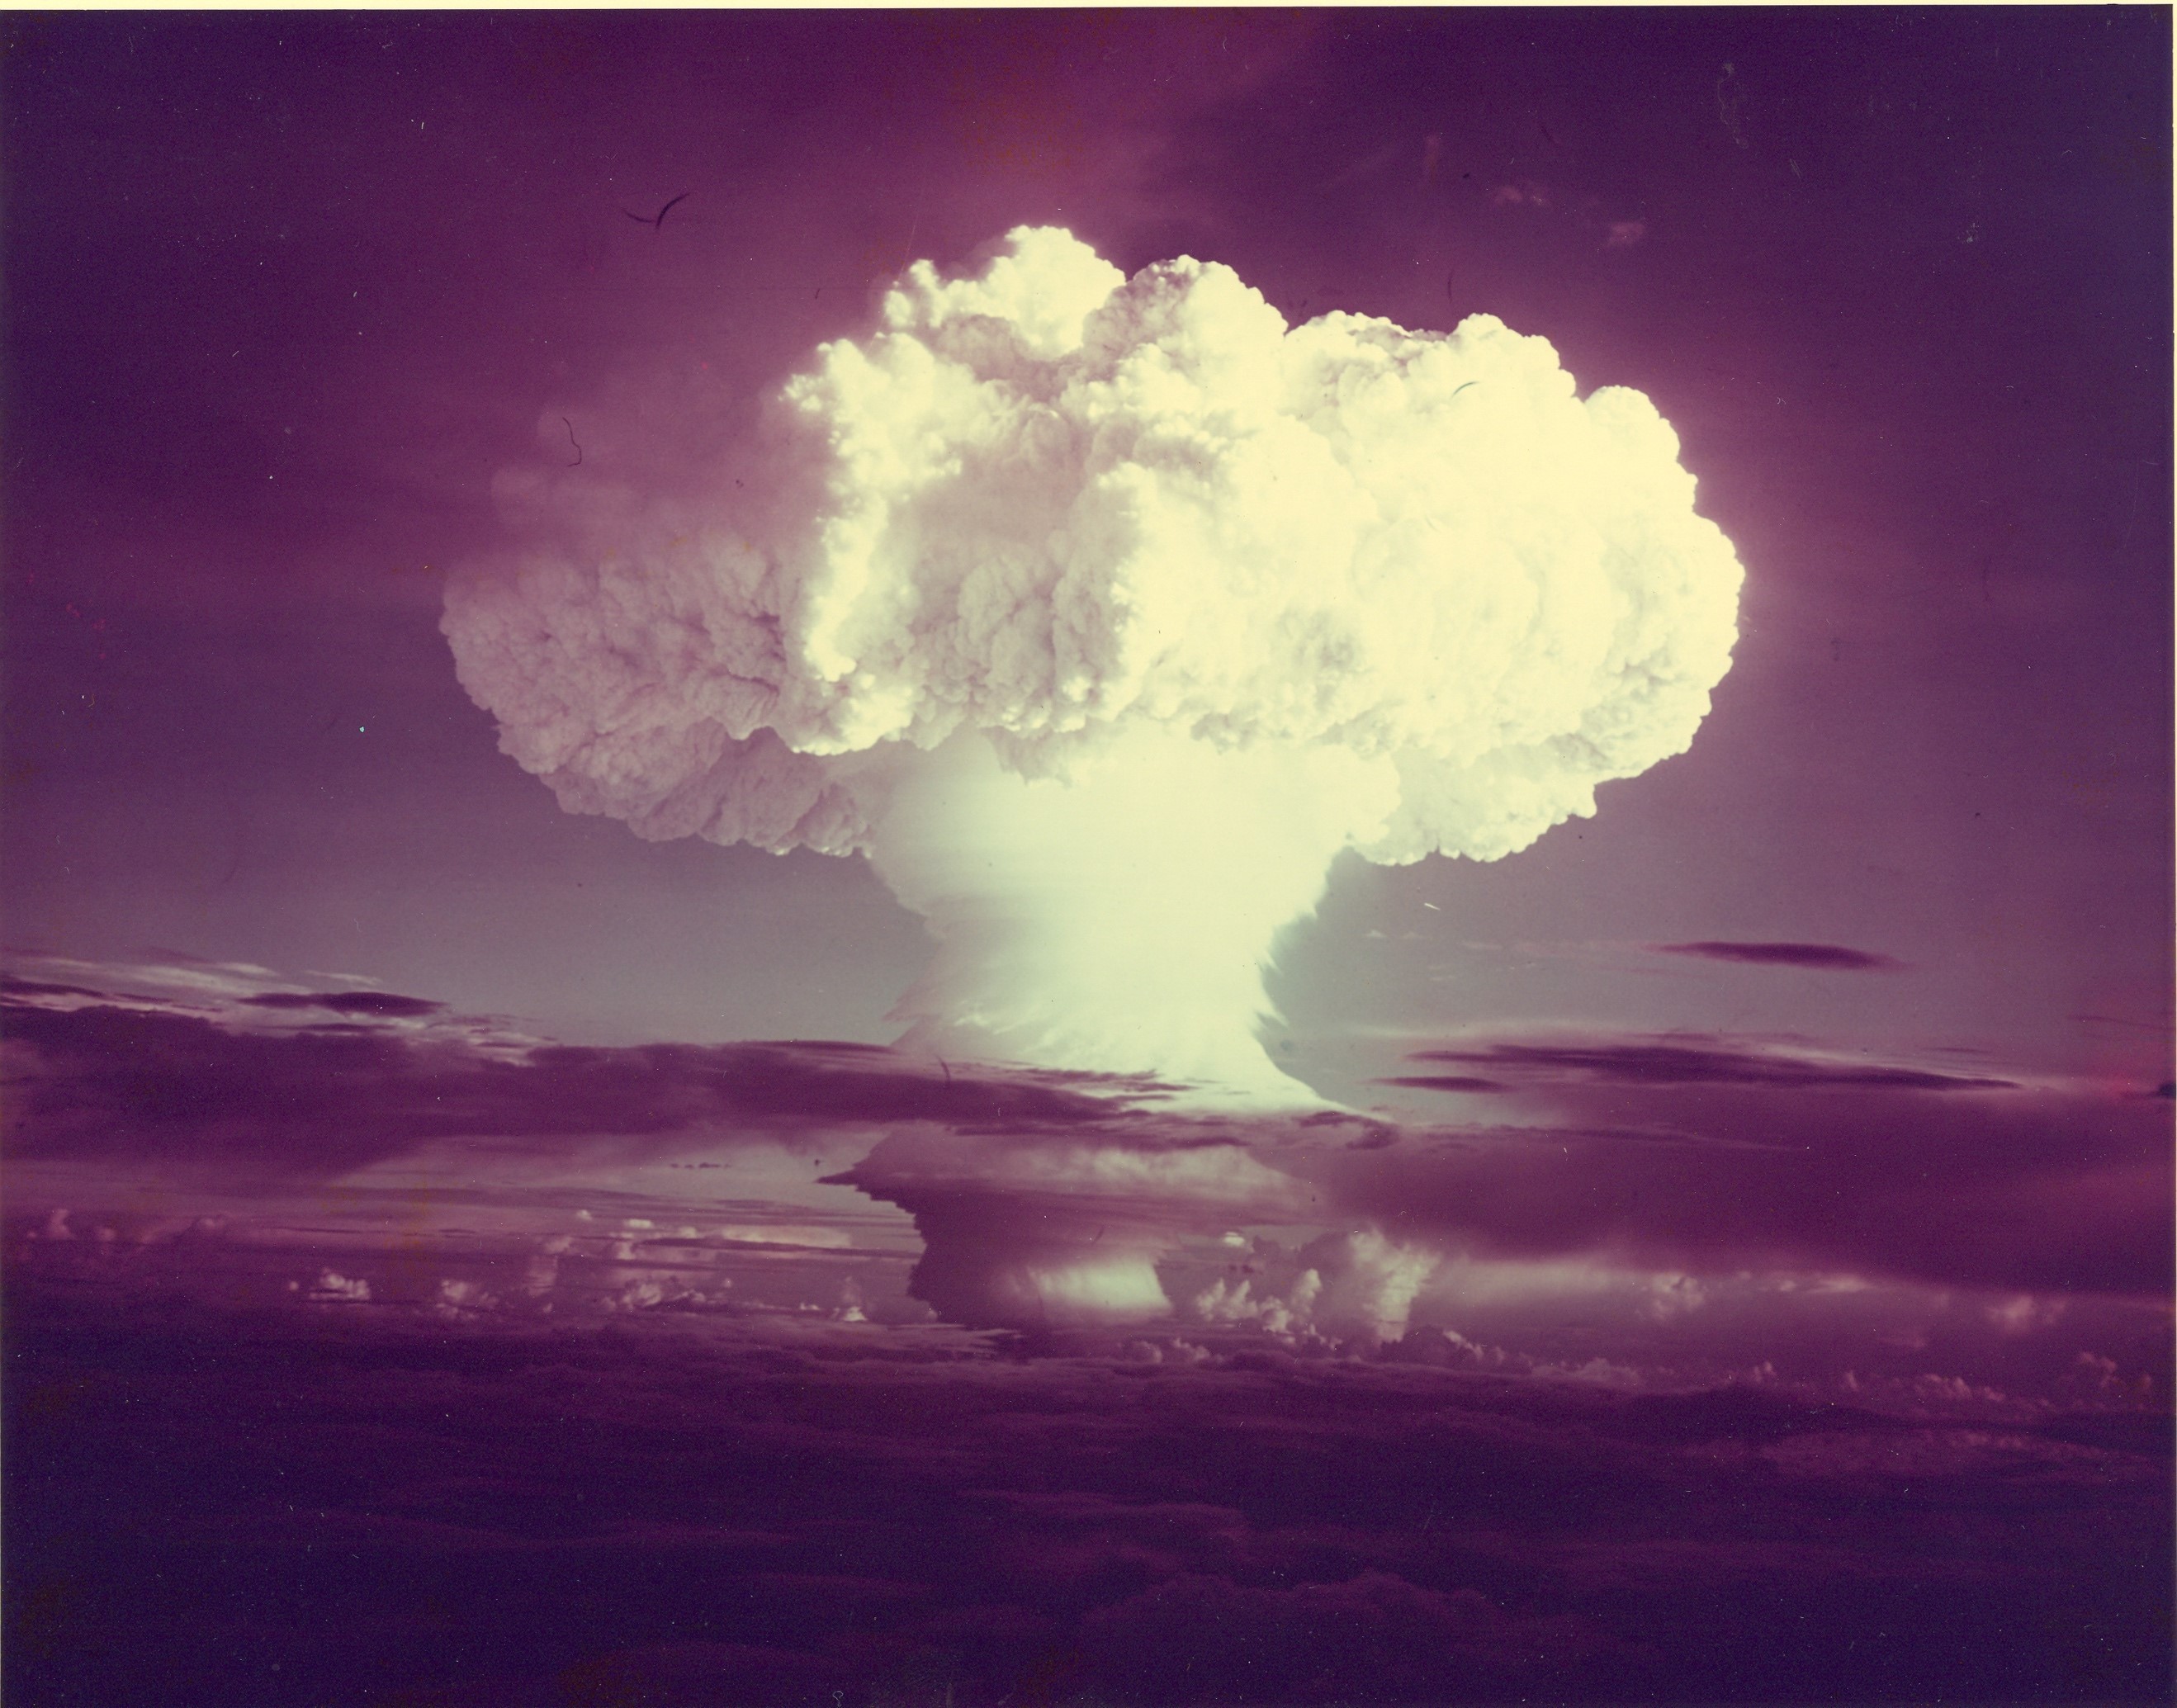 [Translate to English:] The mushroom cloud from the Ivy Mike test conducted by the U.S. in the Marshall Islands in 1952. Source: https://en.m.wikipedia.org/wiki/Ivy_Mike#/media/File%3A%22Ivy_Mike%22_atmospheric_nuclear_test_-_November_1952_-_Flickr_-_The_Official_CTBTO_Photostre